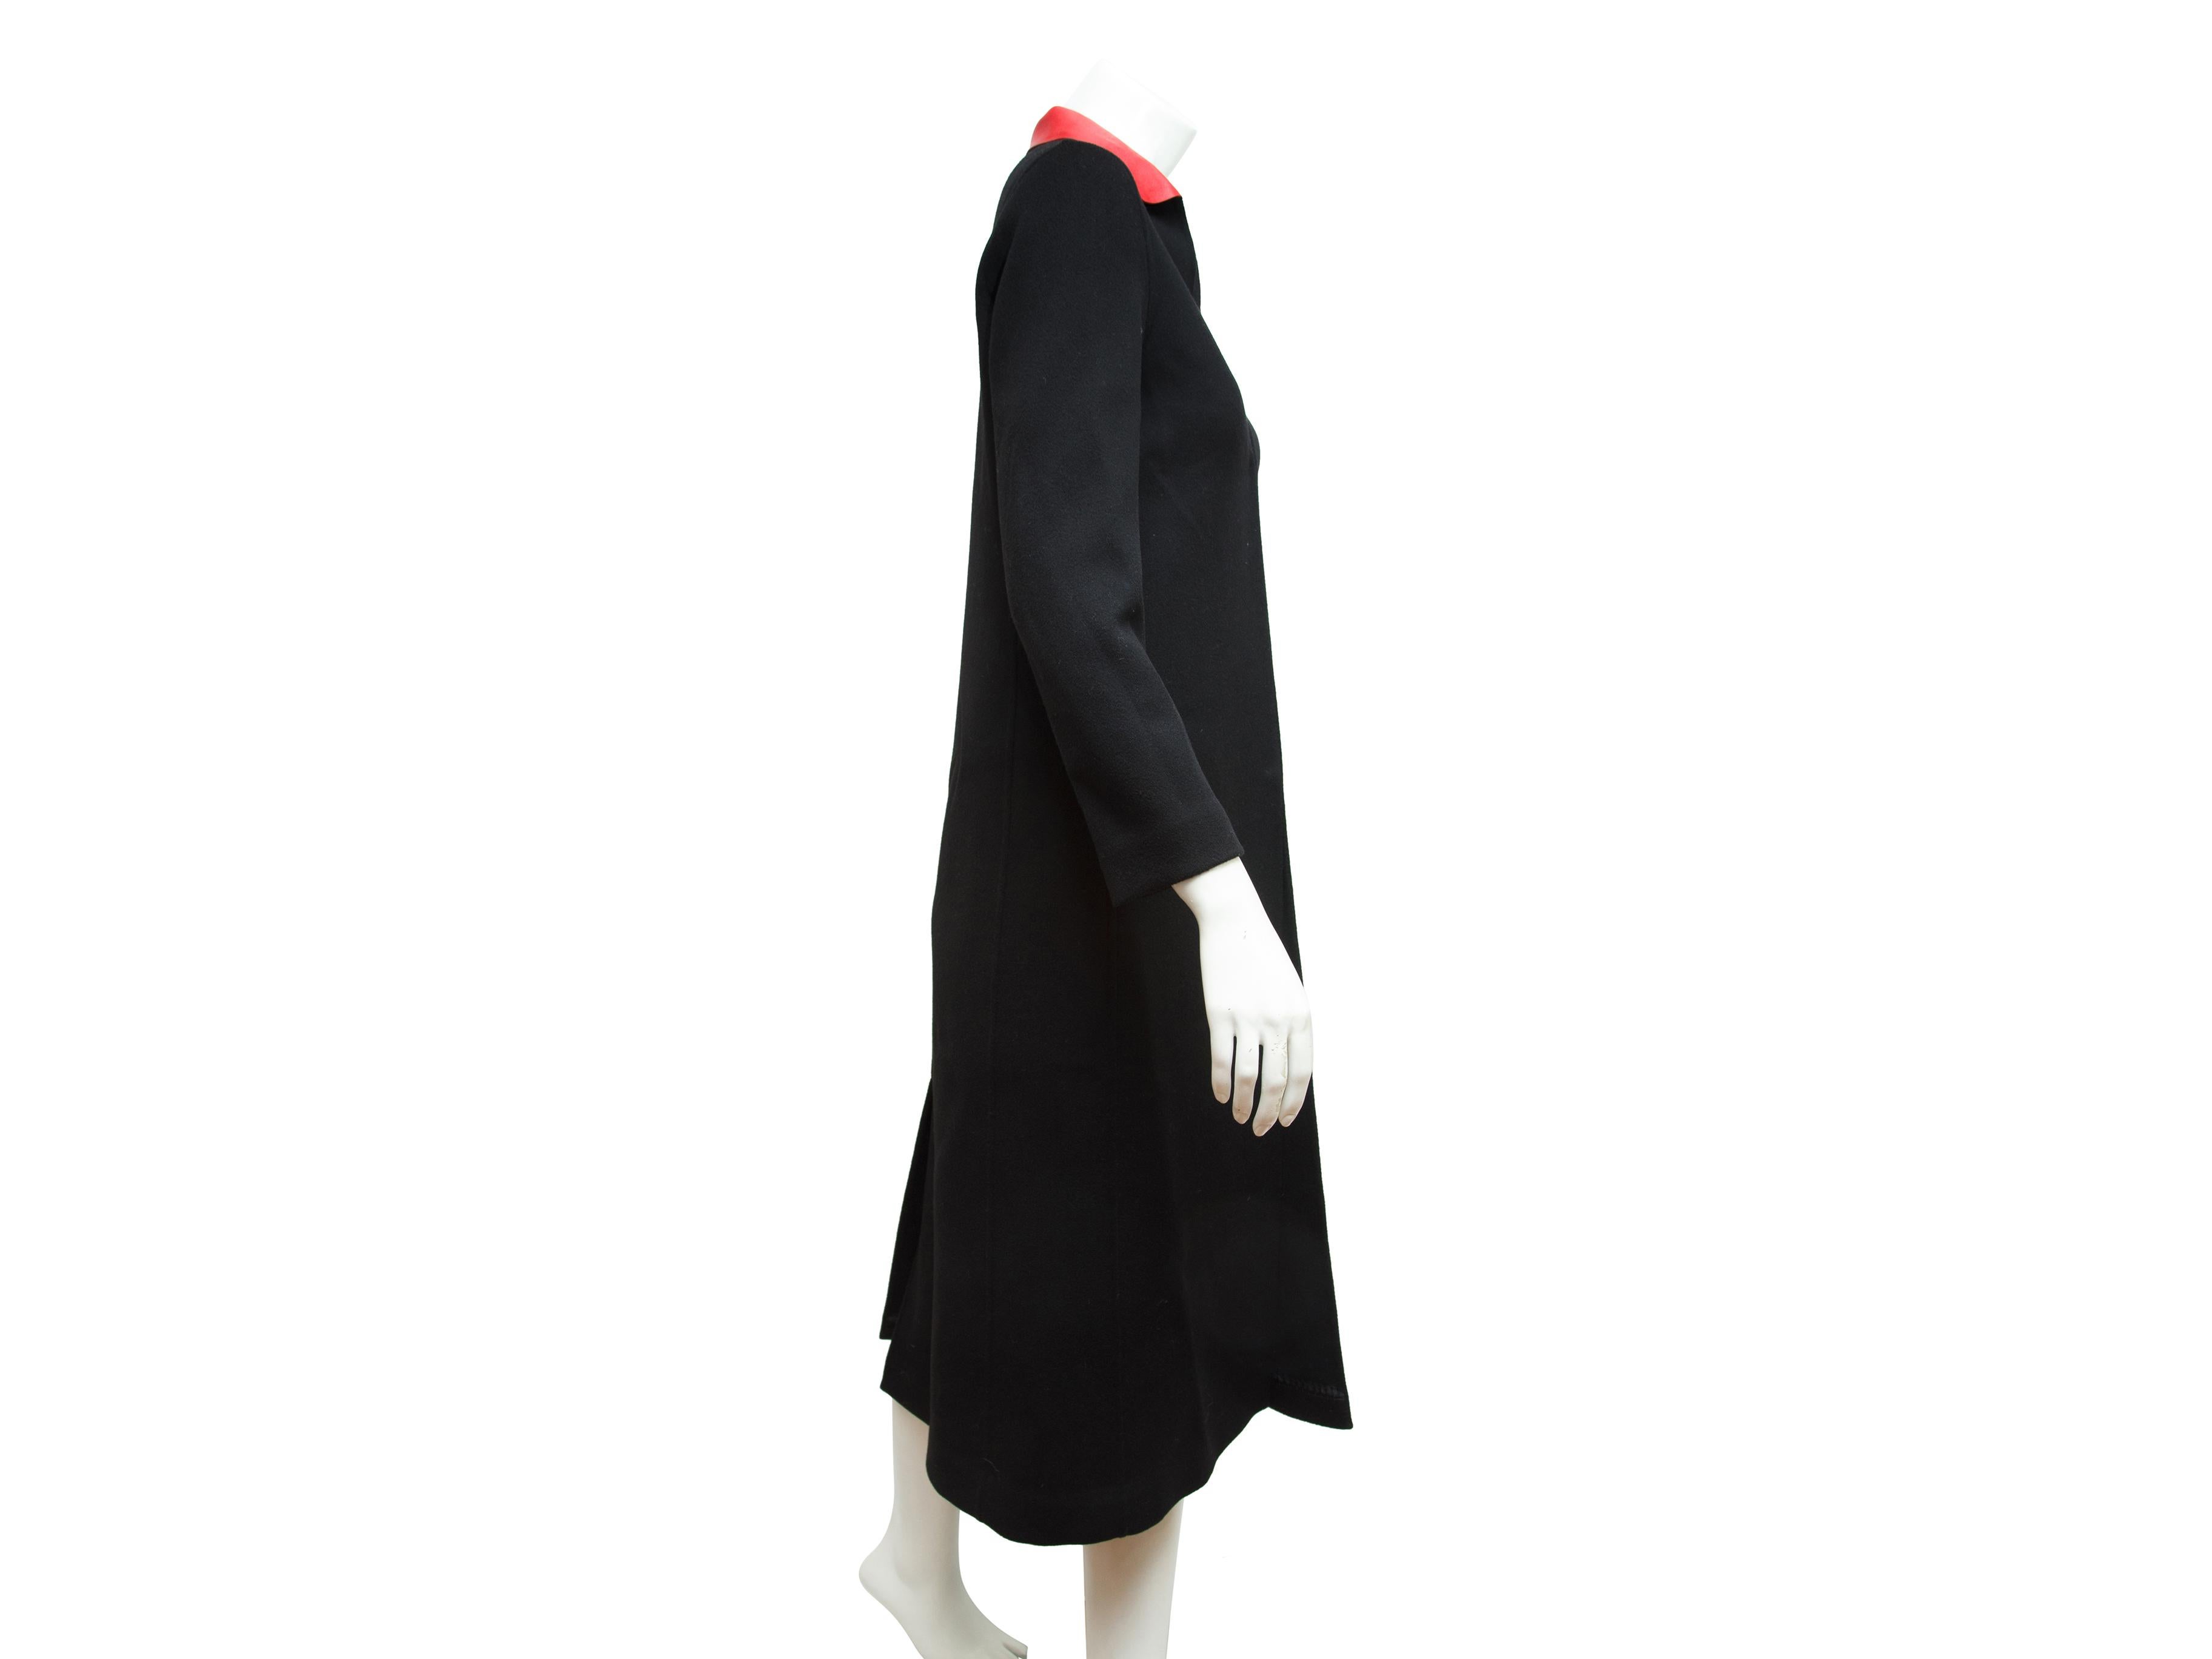 Product details:  Black long wool coat by Valentino.  Red spread leather collar.  Long sleeves.  Concealed front closure.  Center back hem vent.  Label size IT 40.  38